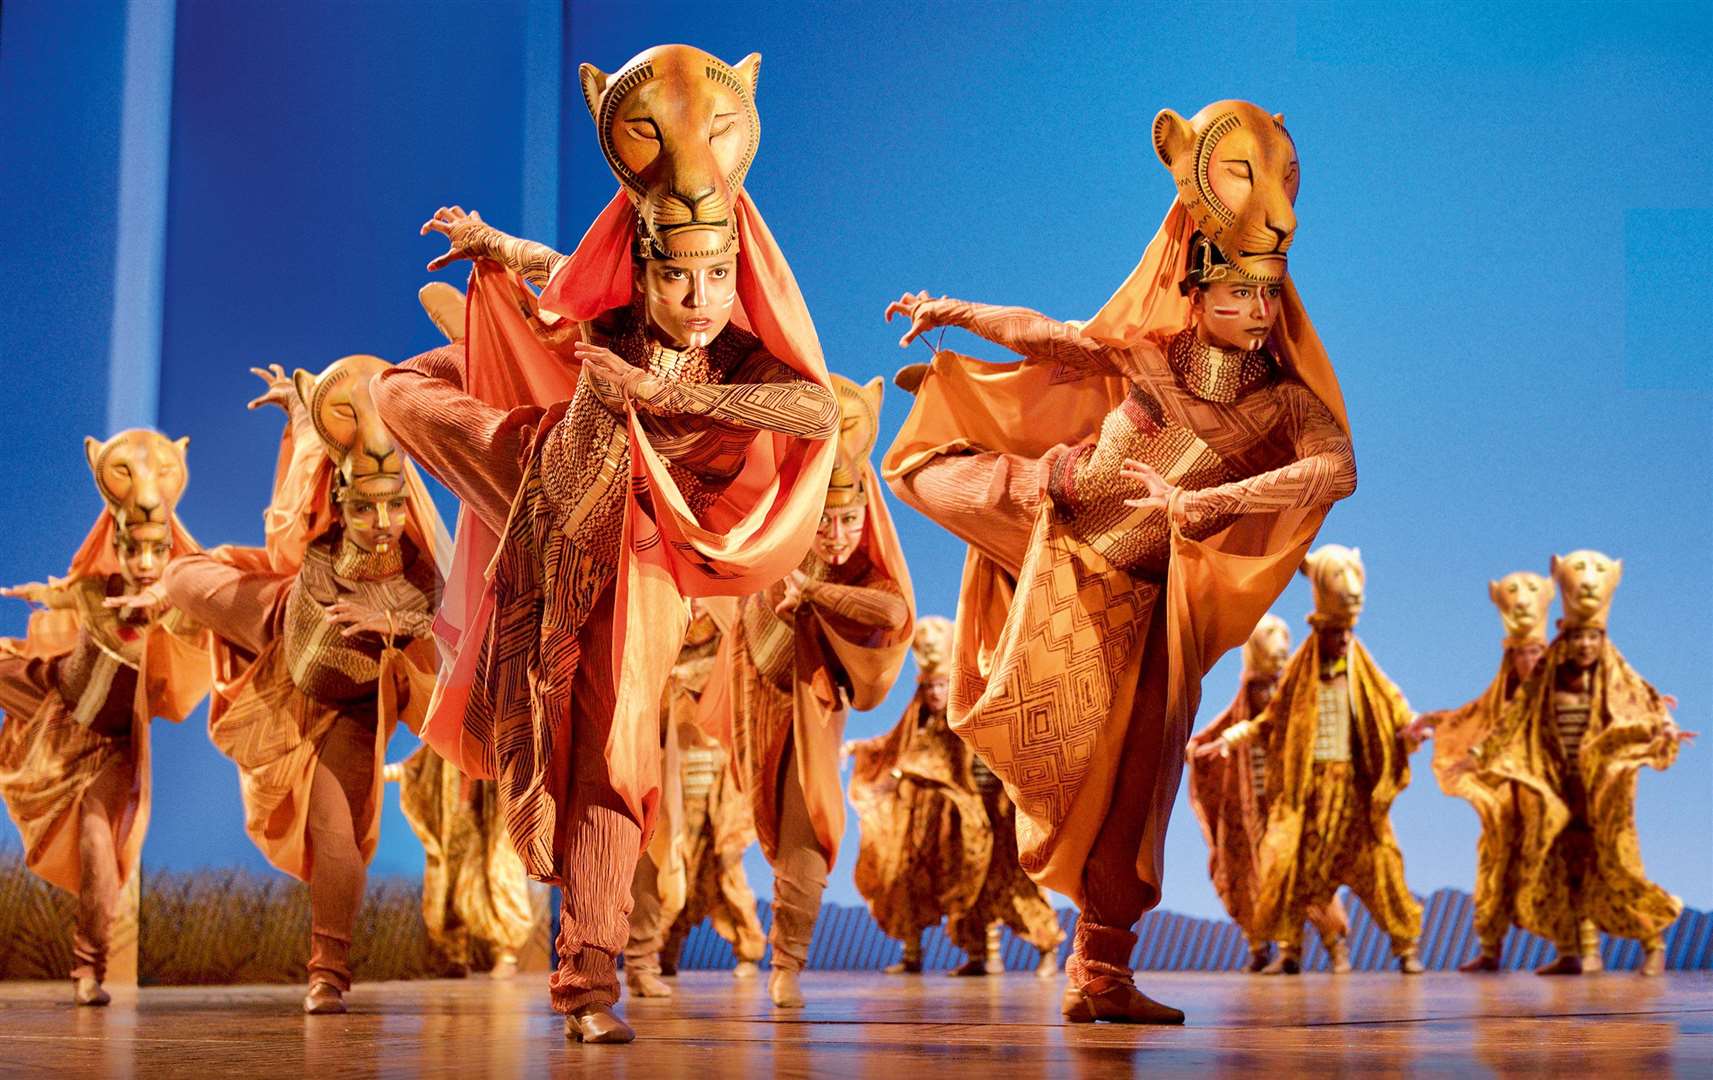 Disney's The Lion King brings the animals of Africa to life